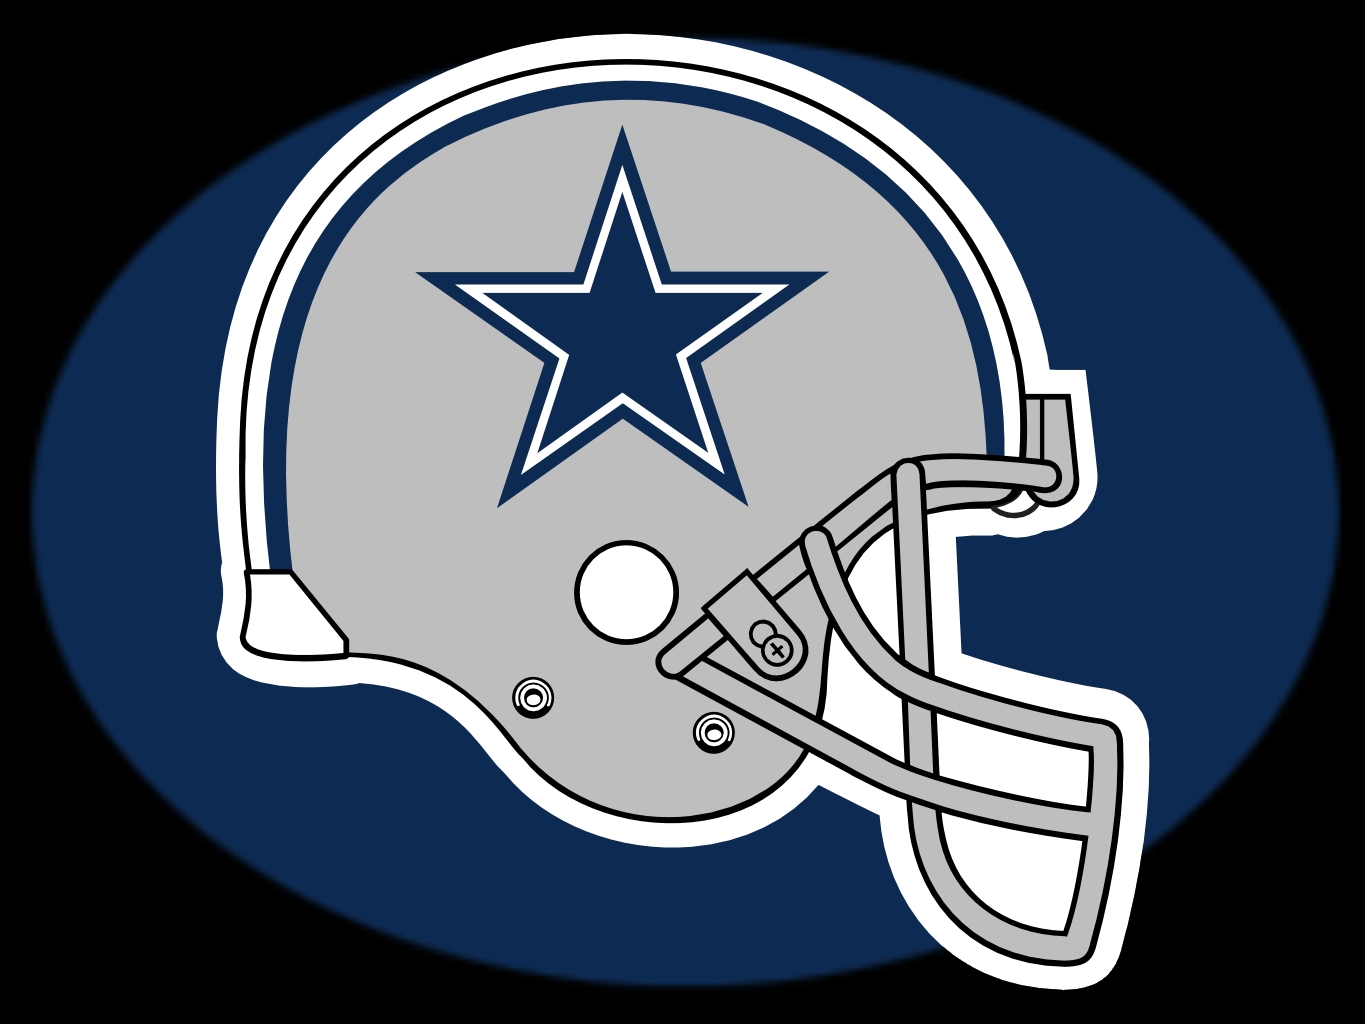 Clip Arts Related To : nfl dallas cowboys logo. 